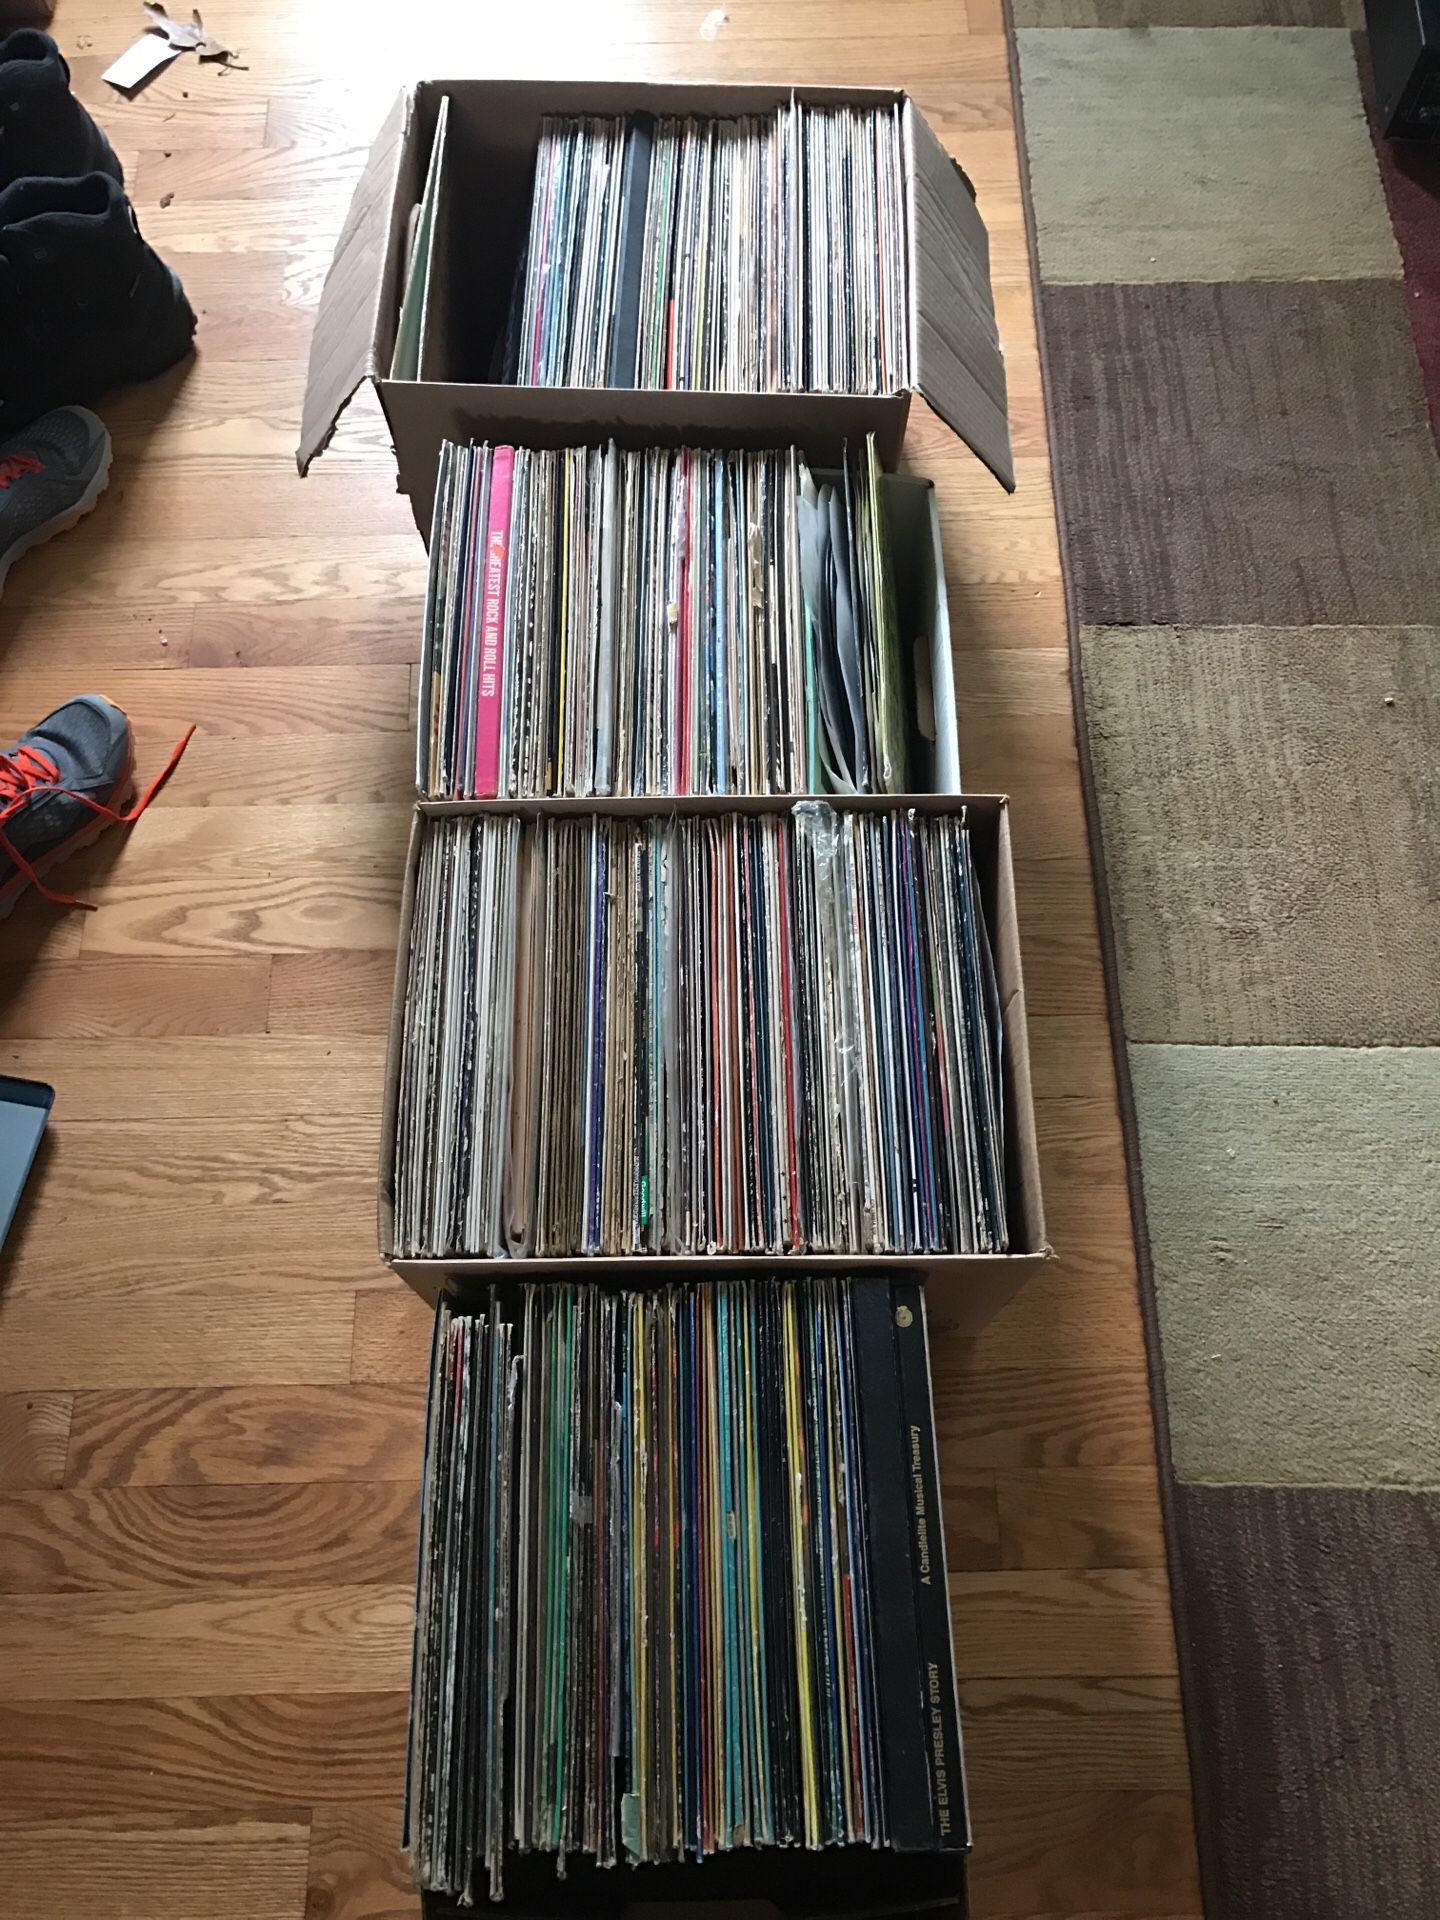 4 boxes of Vinyl Record LP's - all must go this weekend